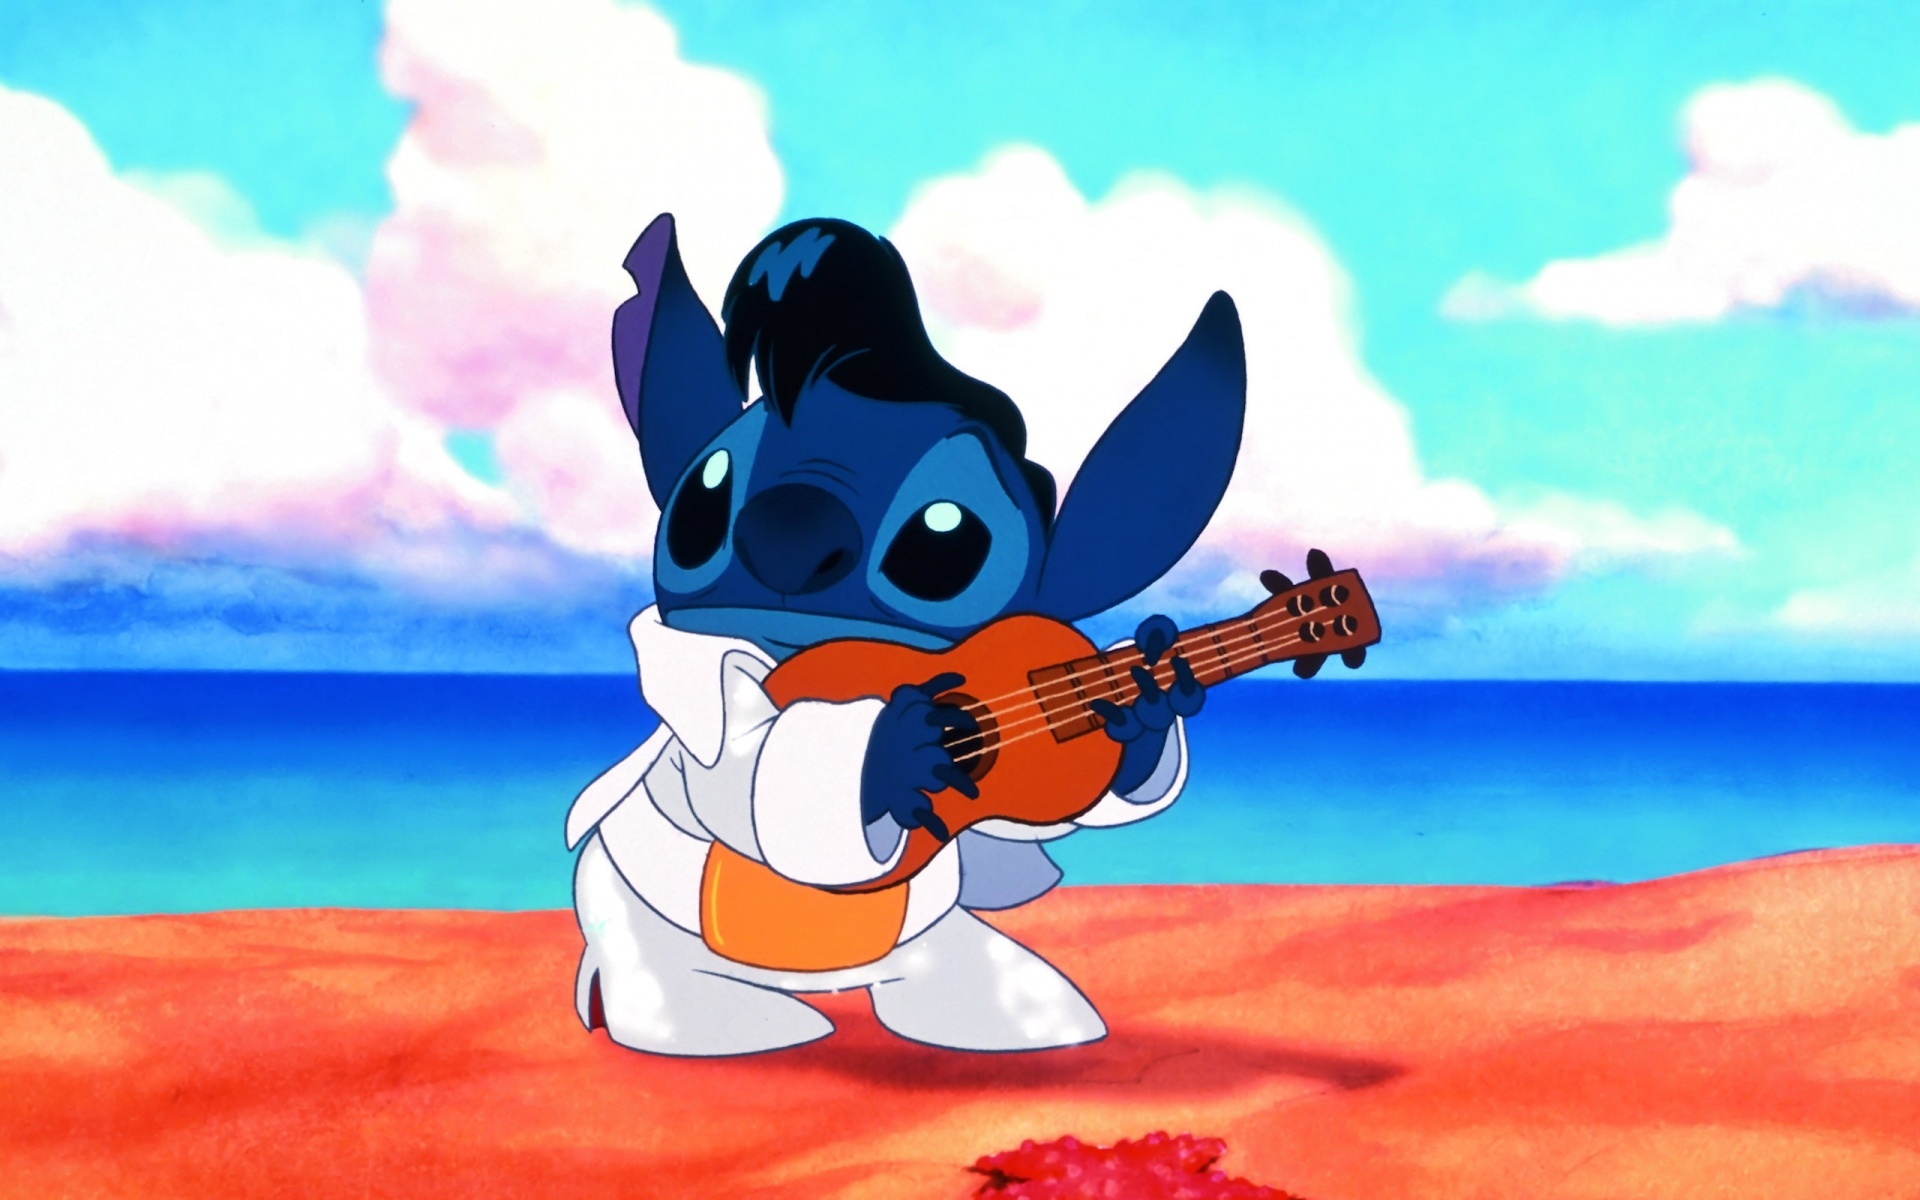 Stitch animation, Lilo & Stitch wallpapers, HD wallpapers, Popular backgrounds, 1920x1200 HD Desktop